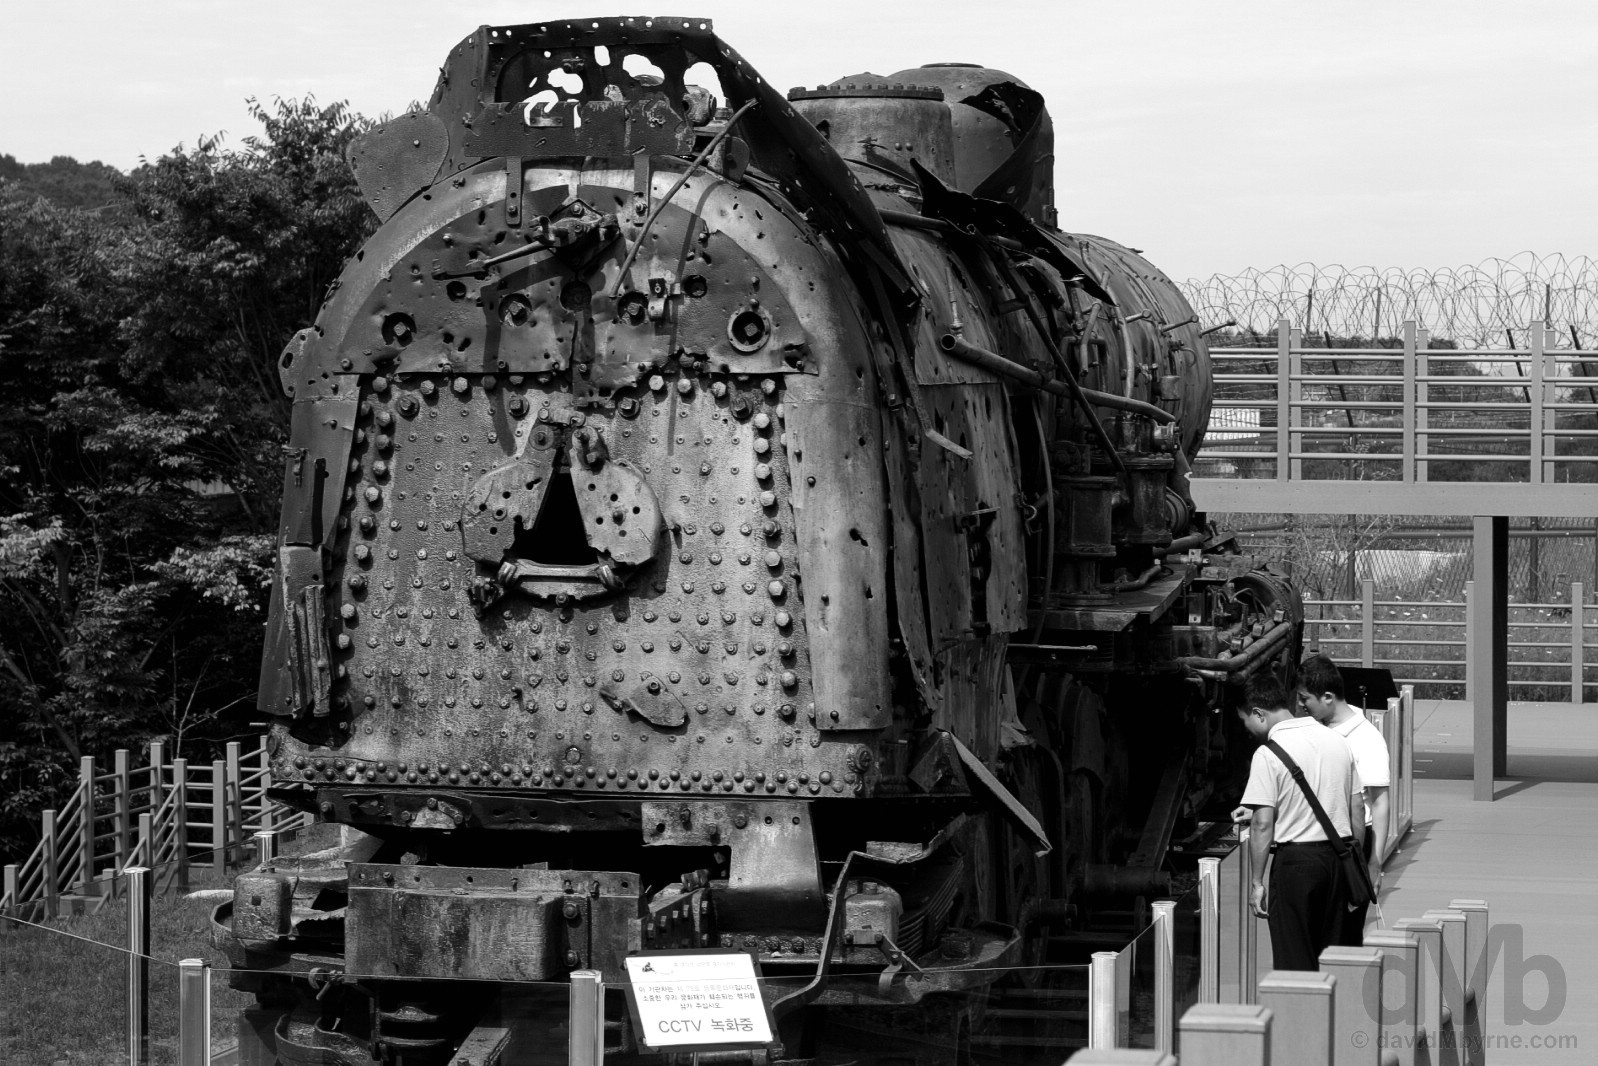 The discarded steam locomotive, a rusting remnant of the 1950-1953 Korean War, by the Bridge of Freedom of the Demilitarized Zone (DMZ) at Imjingak, South Korea. August 21, 2009.